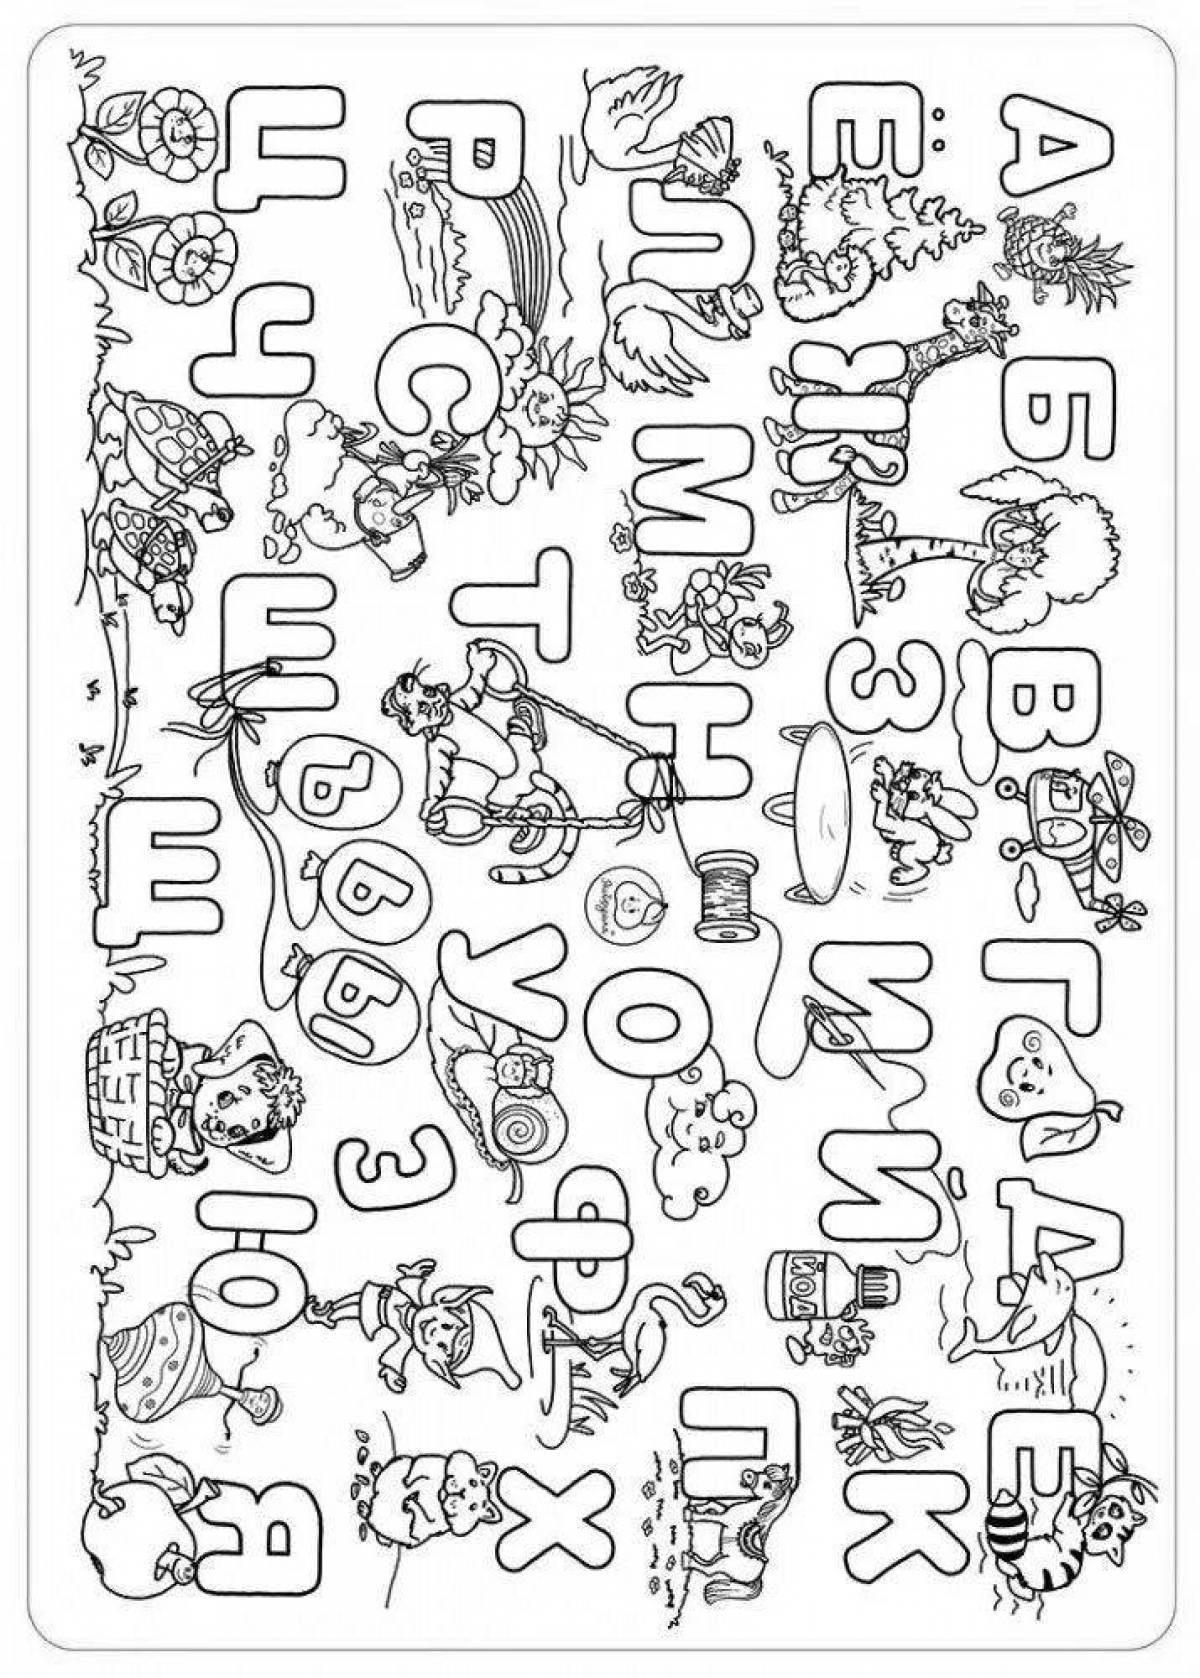 A fun coloring book with the alphabet for kids